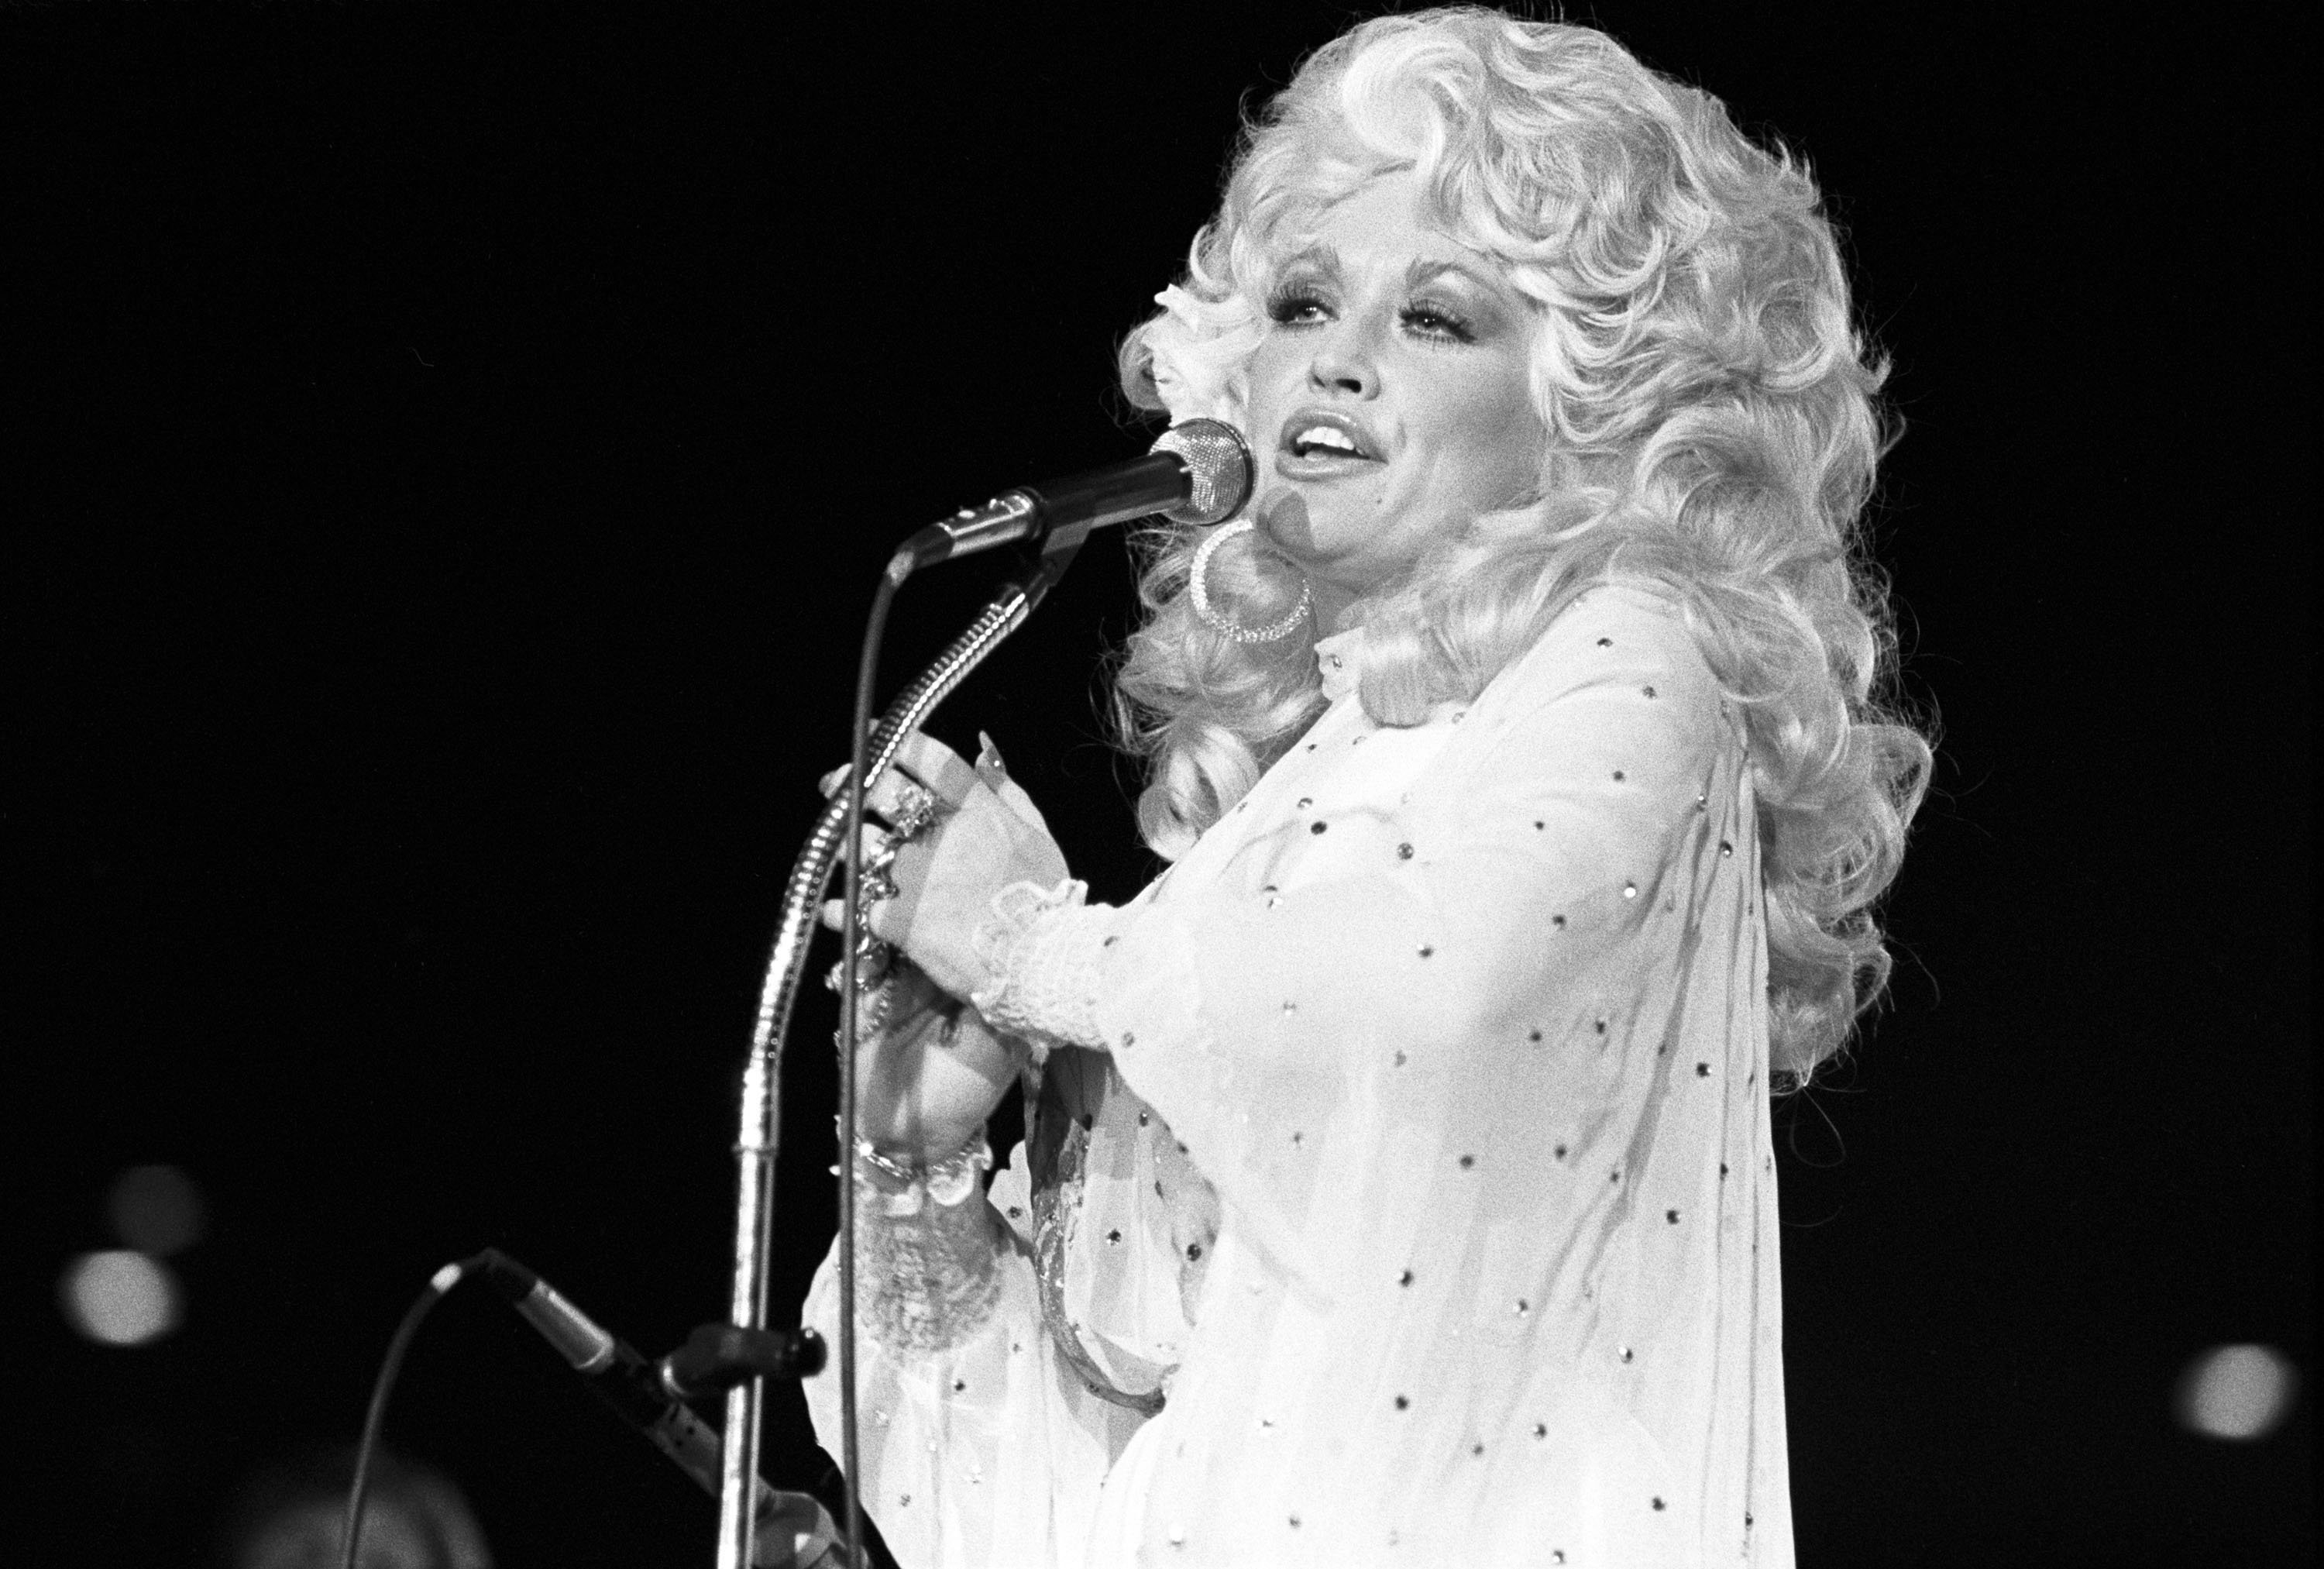 A black and white photo of a '70s Dolly Parton standing in front a microphone.